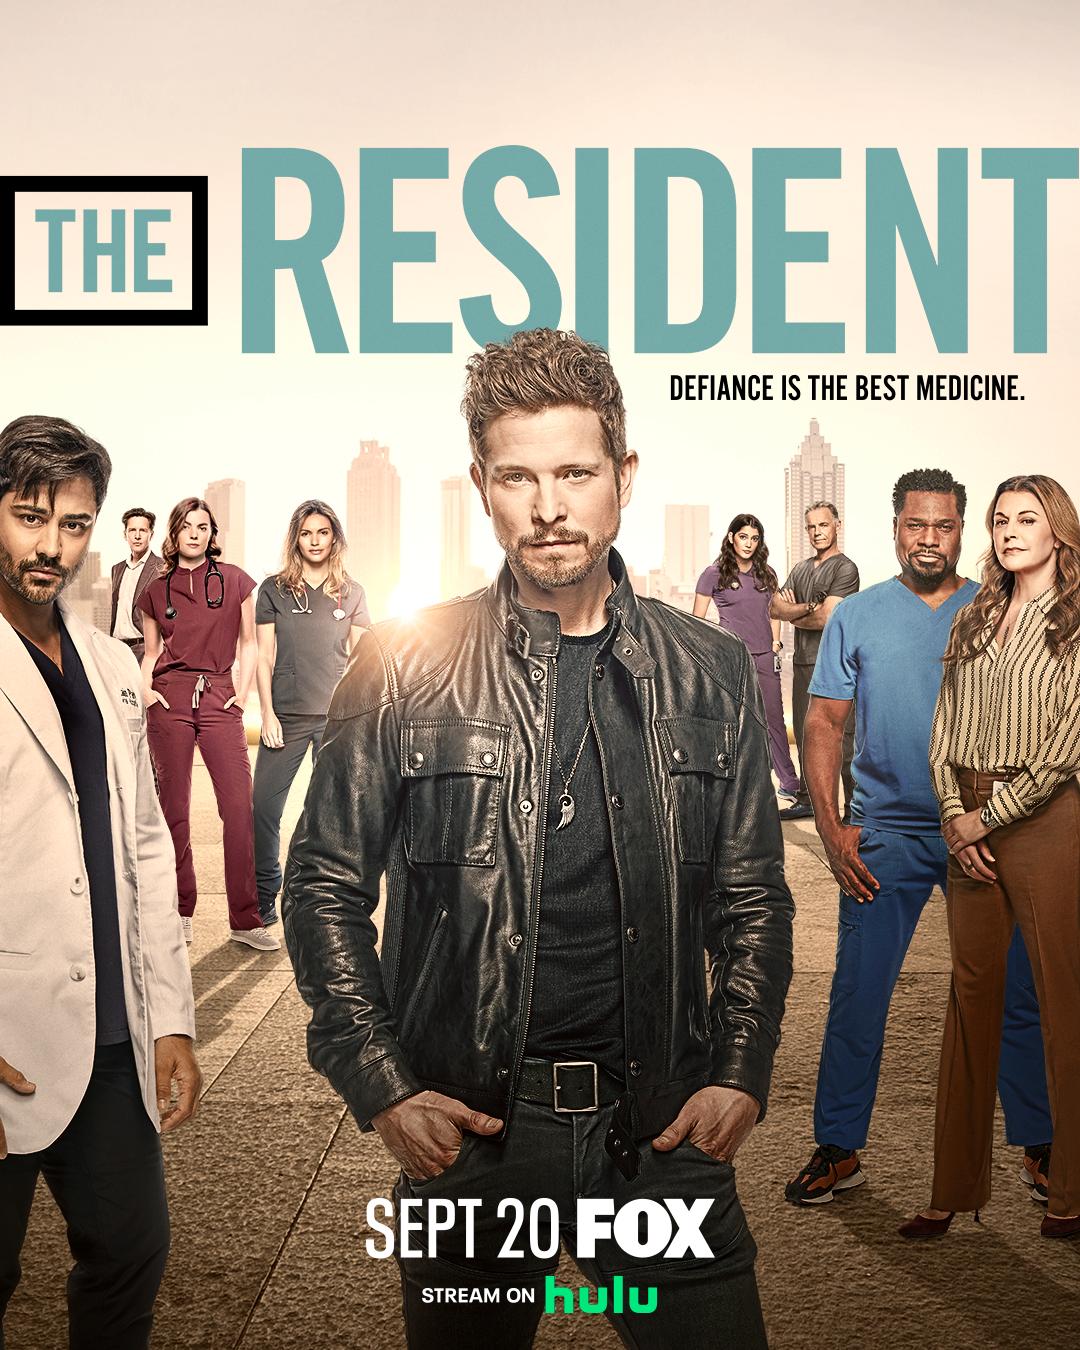 The Resident Season 6 Episode 5: Release Date, Preview & Streaming Details